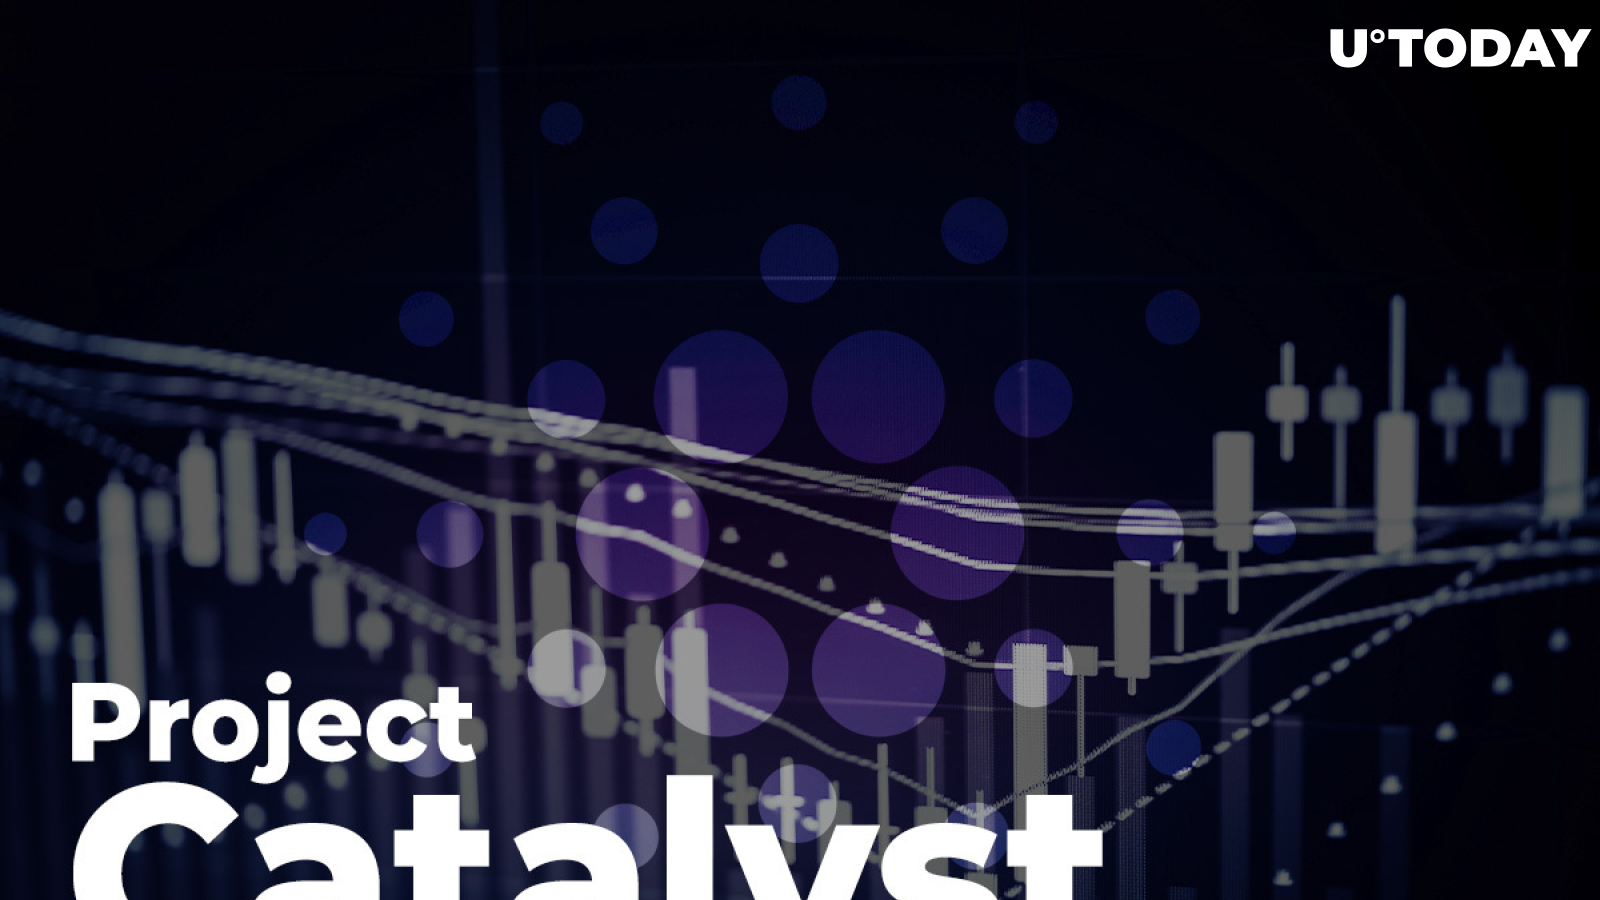 Cardano’s Project Catalyst Closes Its Fund4 With 56 Proposals Funded